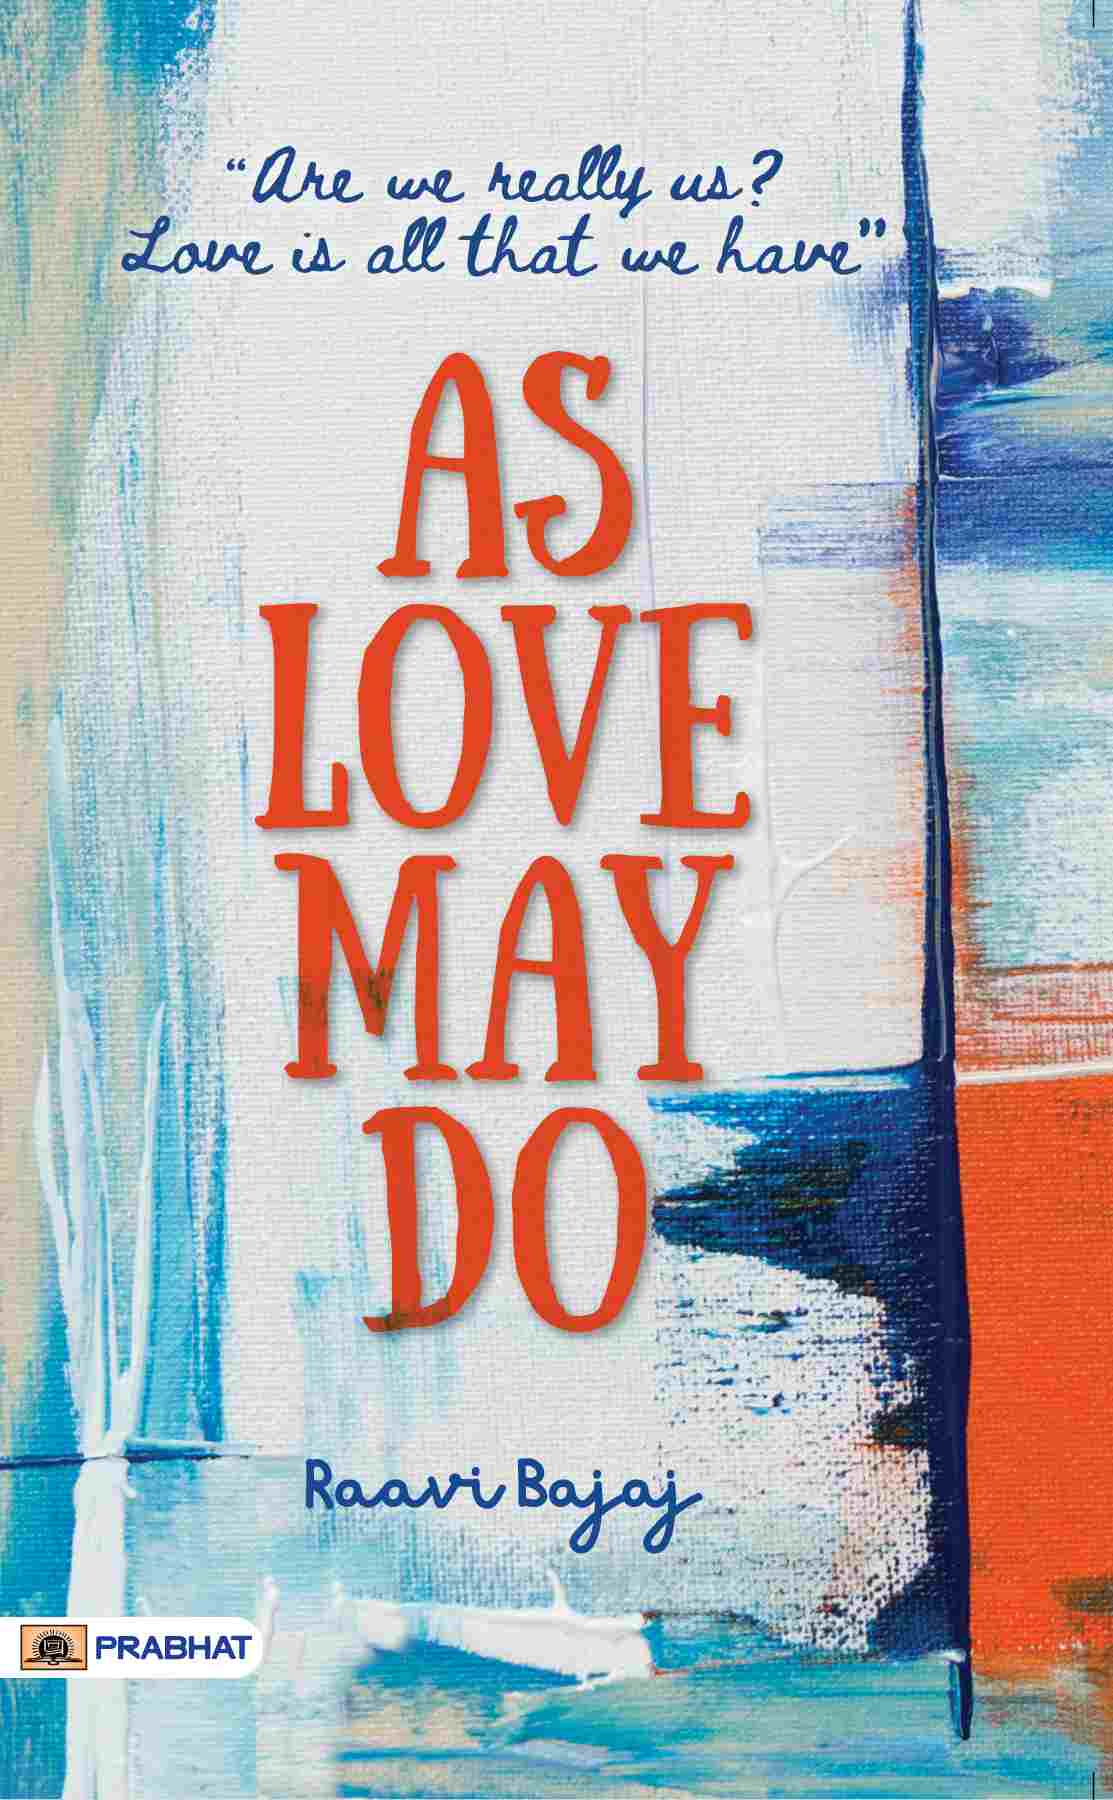 As Love May Do : (Are we really us? Love is all that we have)